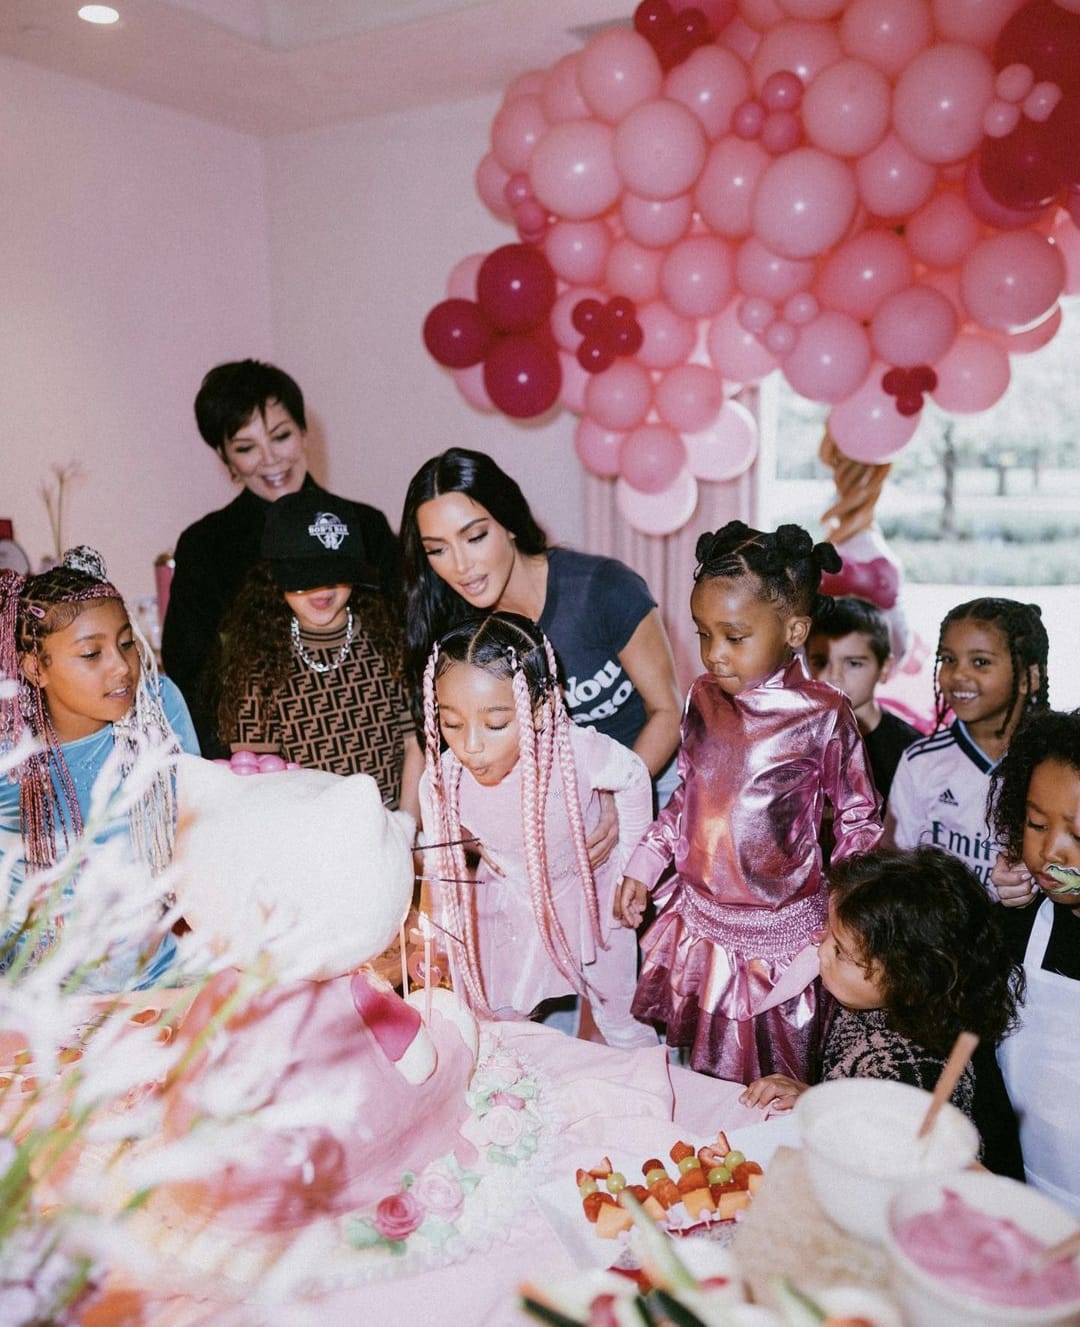 likhoa kim kardashian shared photos of her daughter chicago west s luxurious pink and hello kitty themed birthday party 6532a01e7ee2f Kim Kardashian Shared Photos Of Her Daughter Chicago West's Luxurious Pink And Hello Kitty-themed Birthday Party